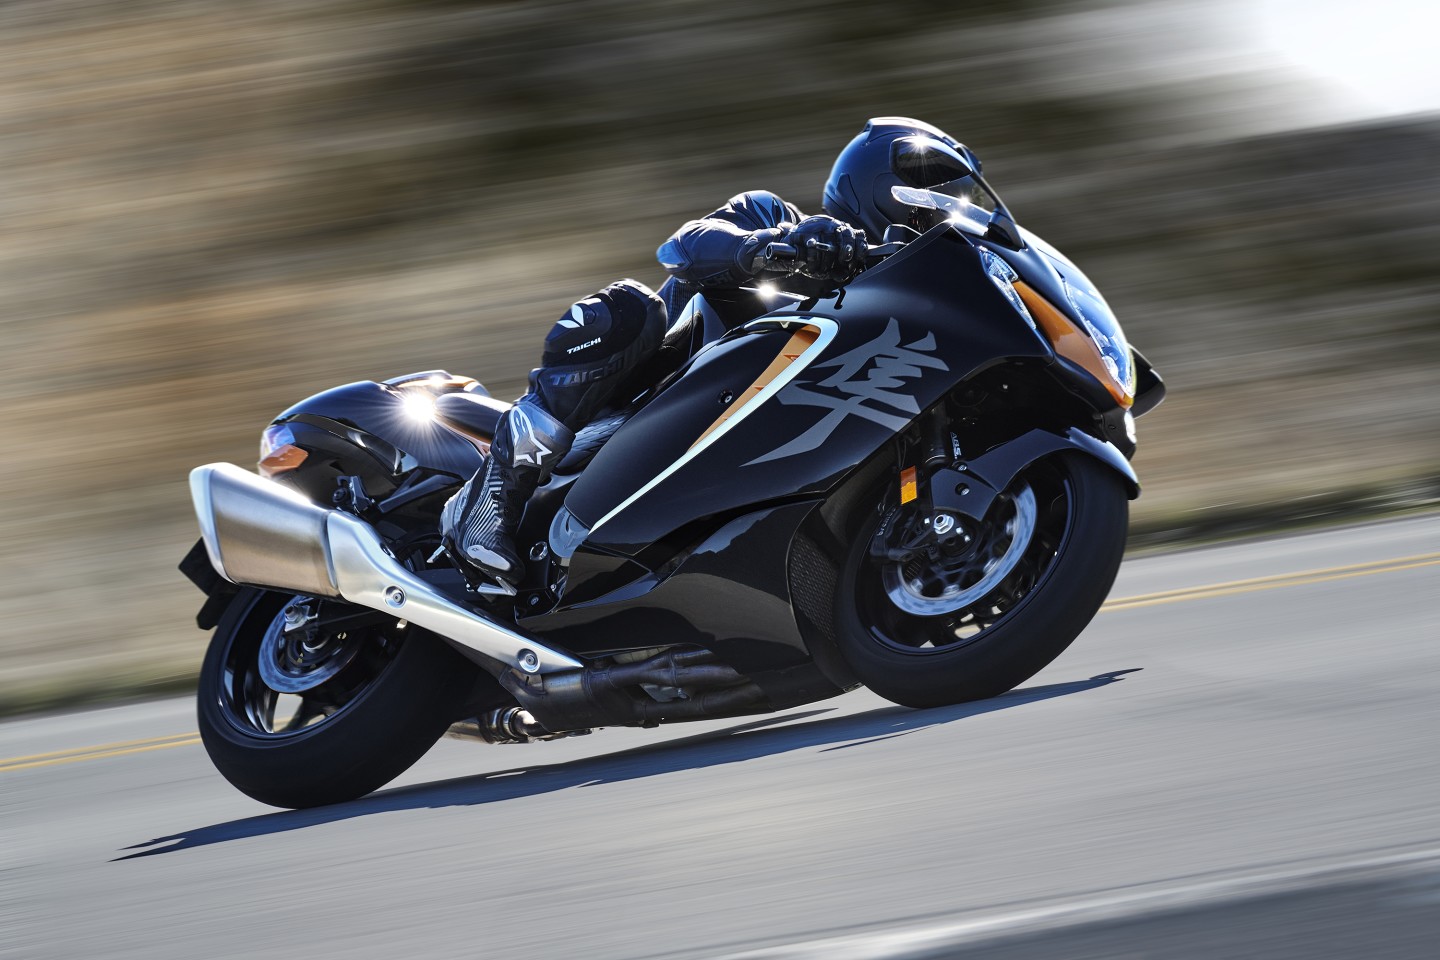 Fully adjustable KYB suspension and a host of electronic rider aids will improve the Hayabusa's thrashability on a twisty road